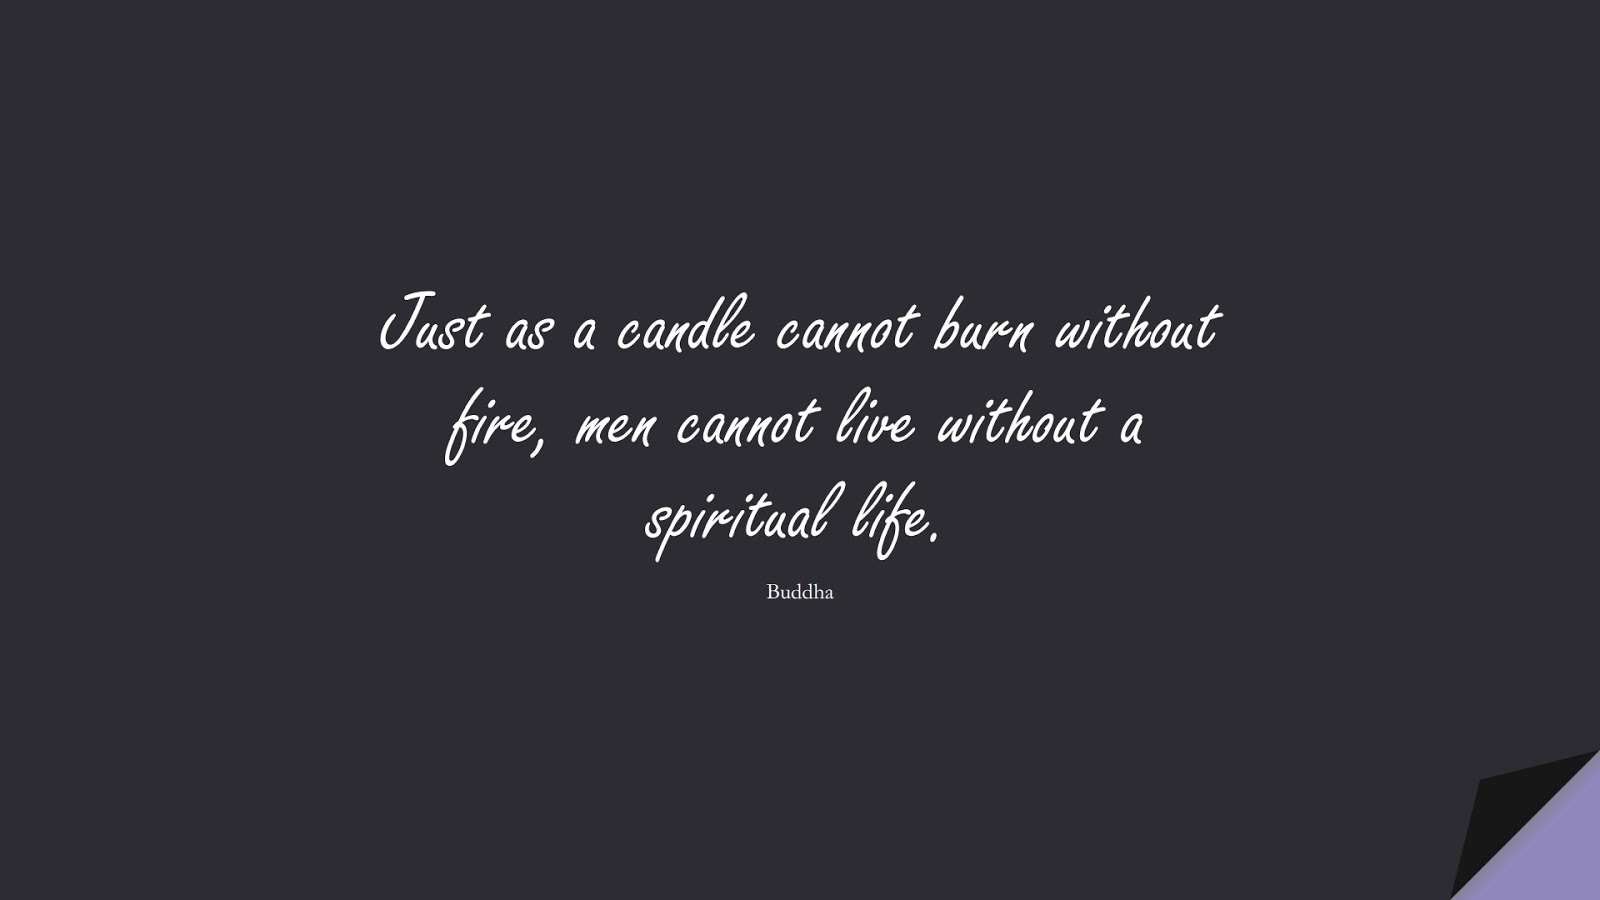 Just as a candle cannot burn without fire, men cannot live without a spiritual life. (Buddha);  #HealthQuotes